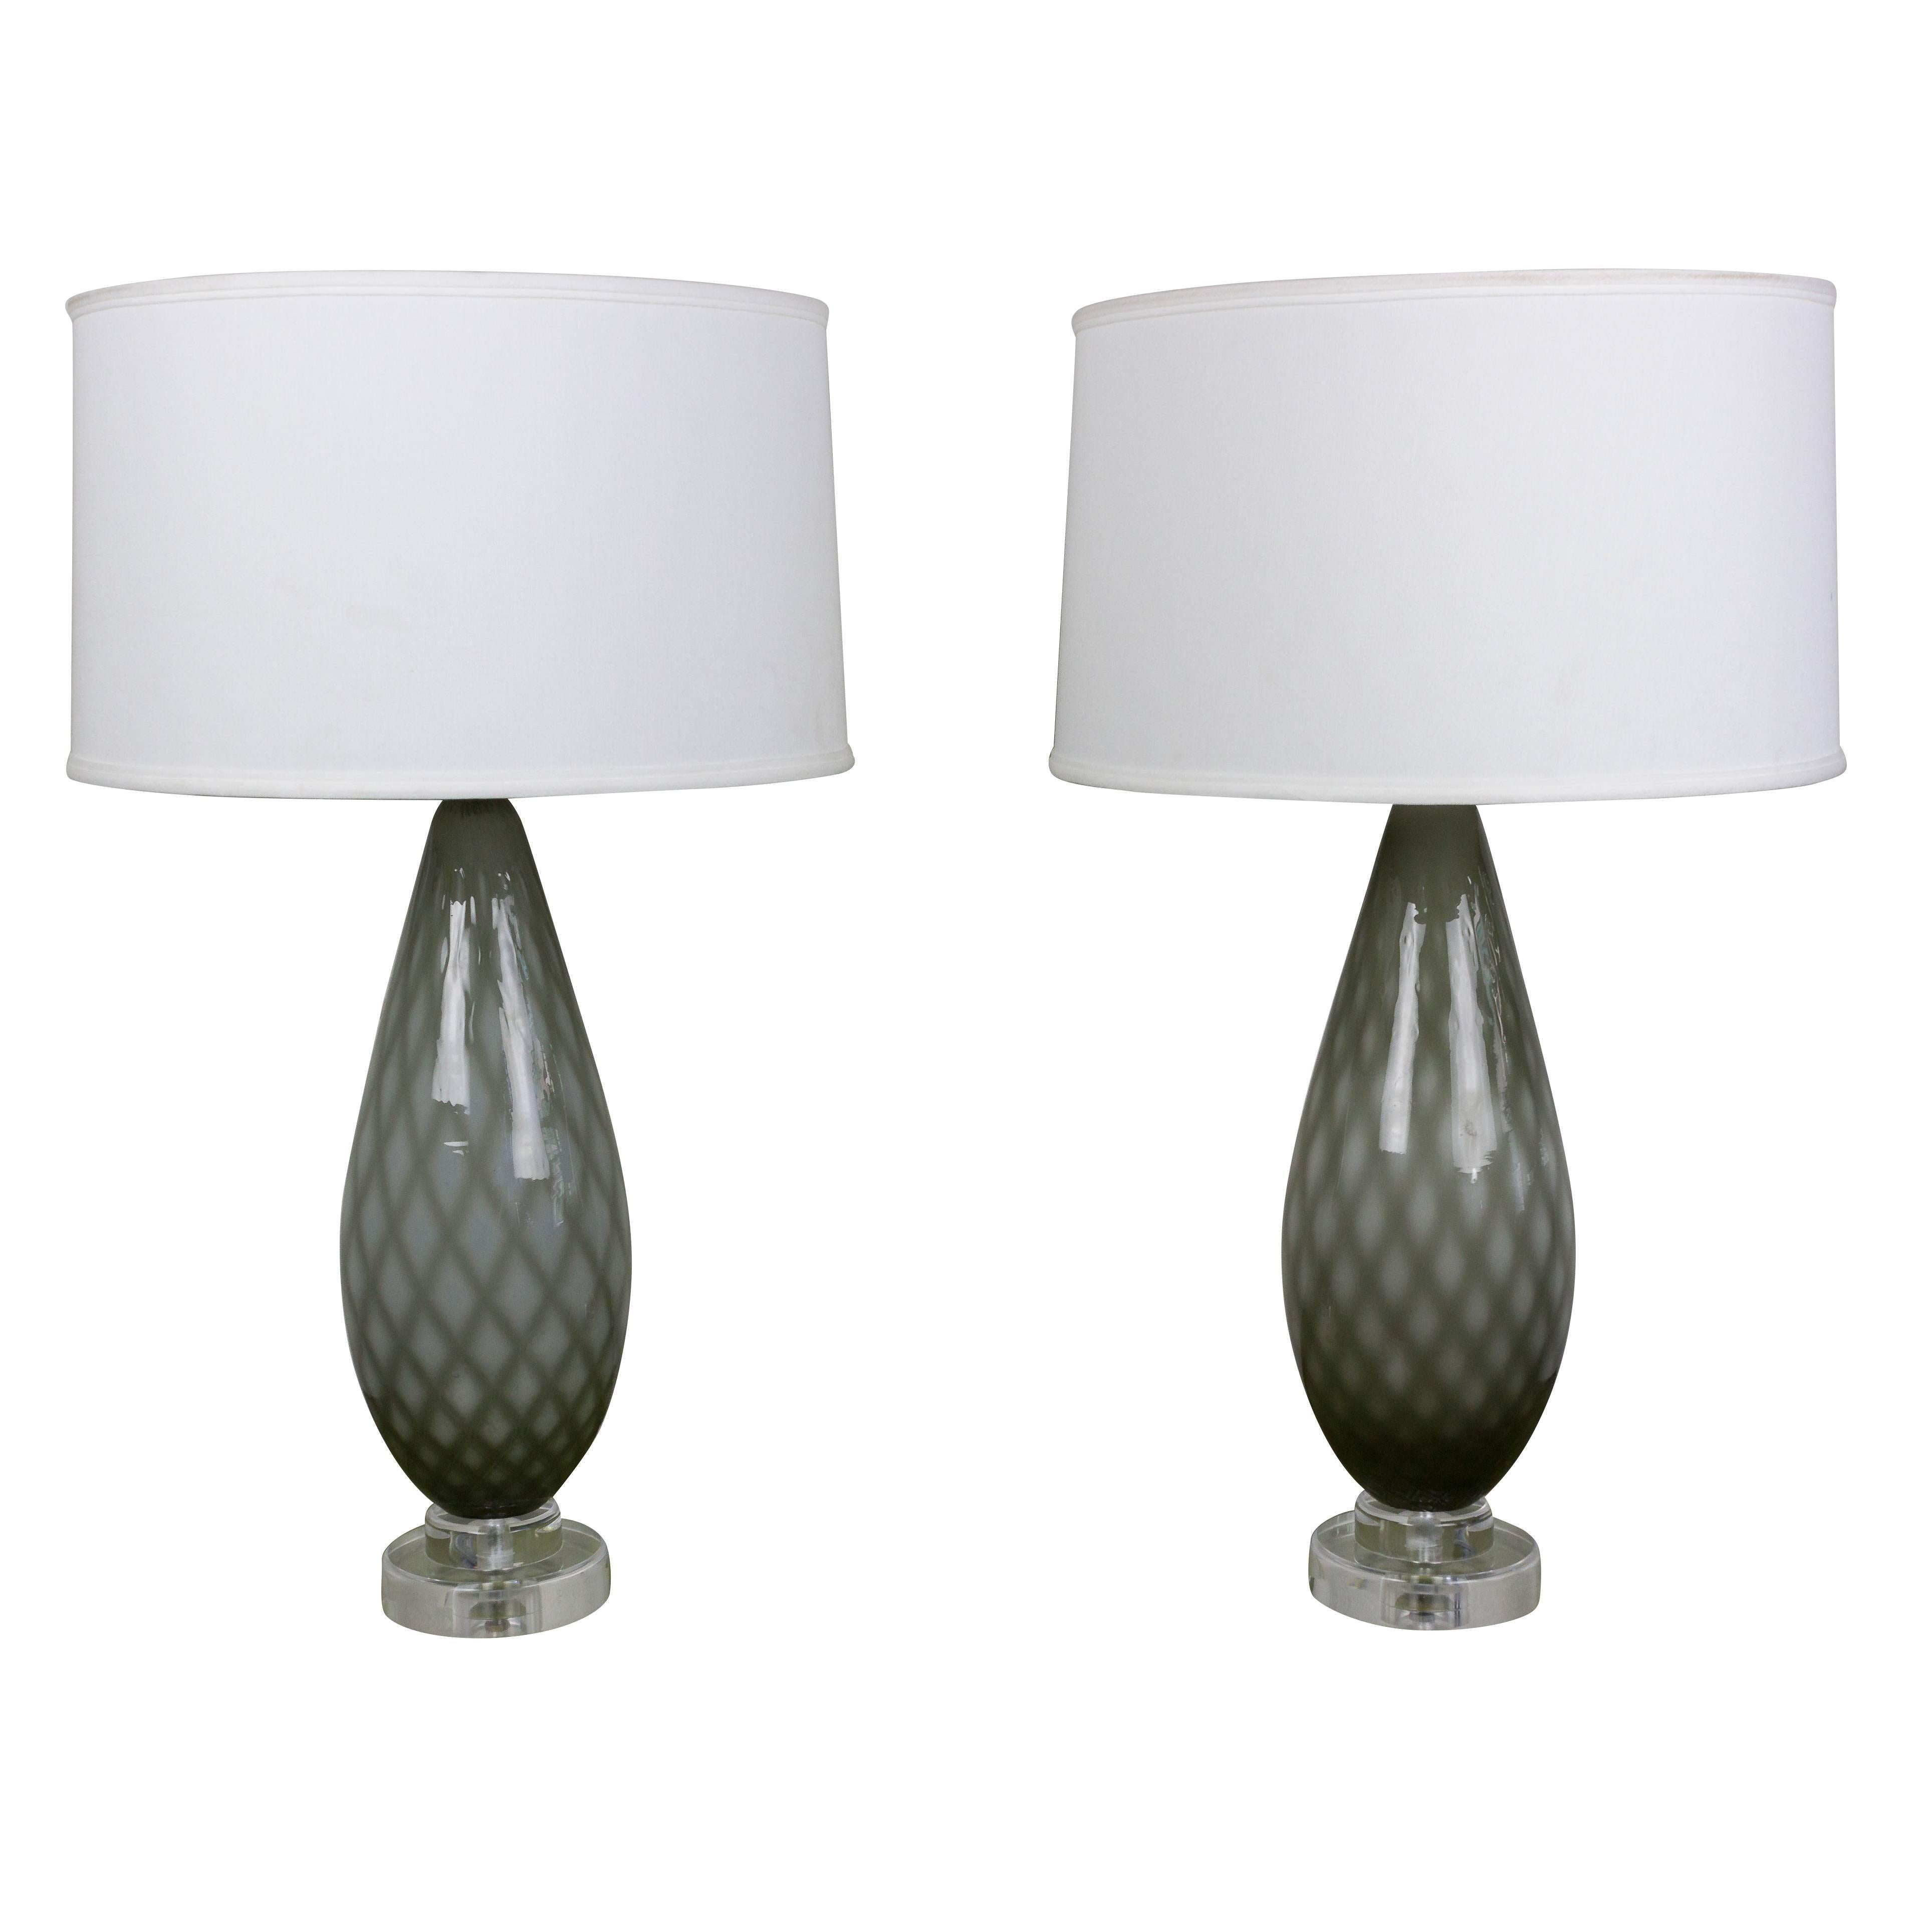 Pair of Grey and White Diamond Patterned Murano Table Lamps For Sale